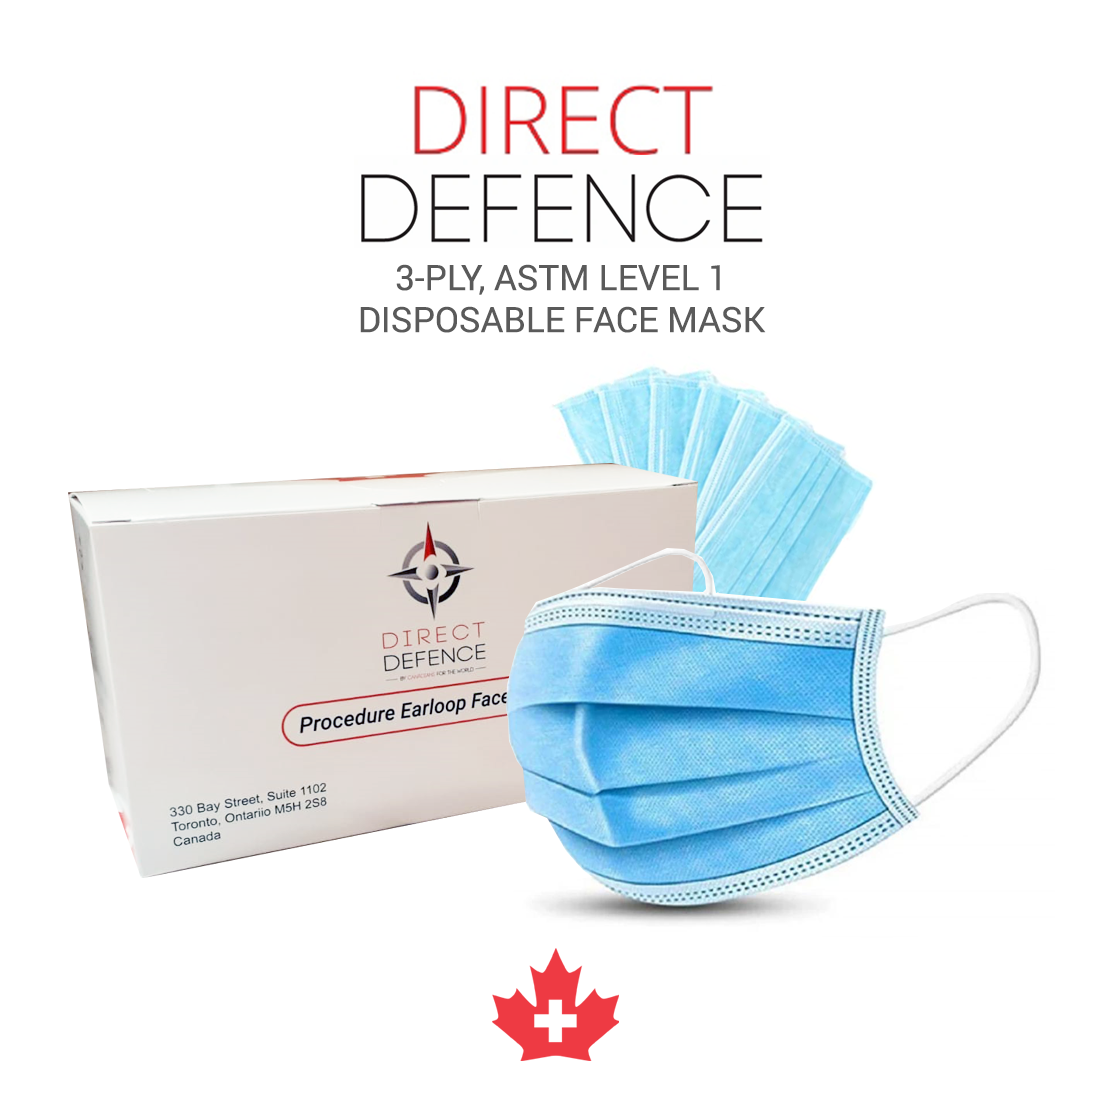 Direct Defence 3-Ply, Basic Non-Medical Disposable Face Mask - Box of 50